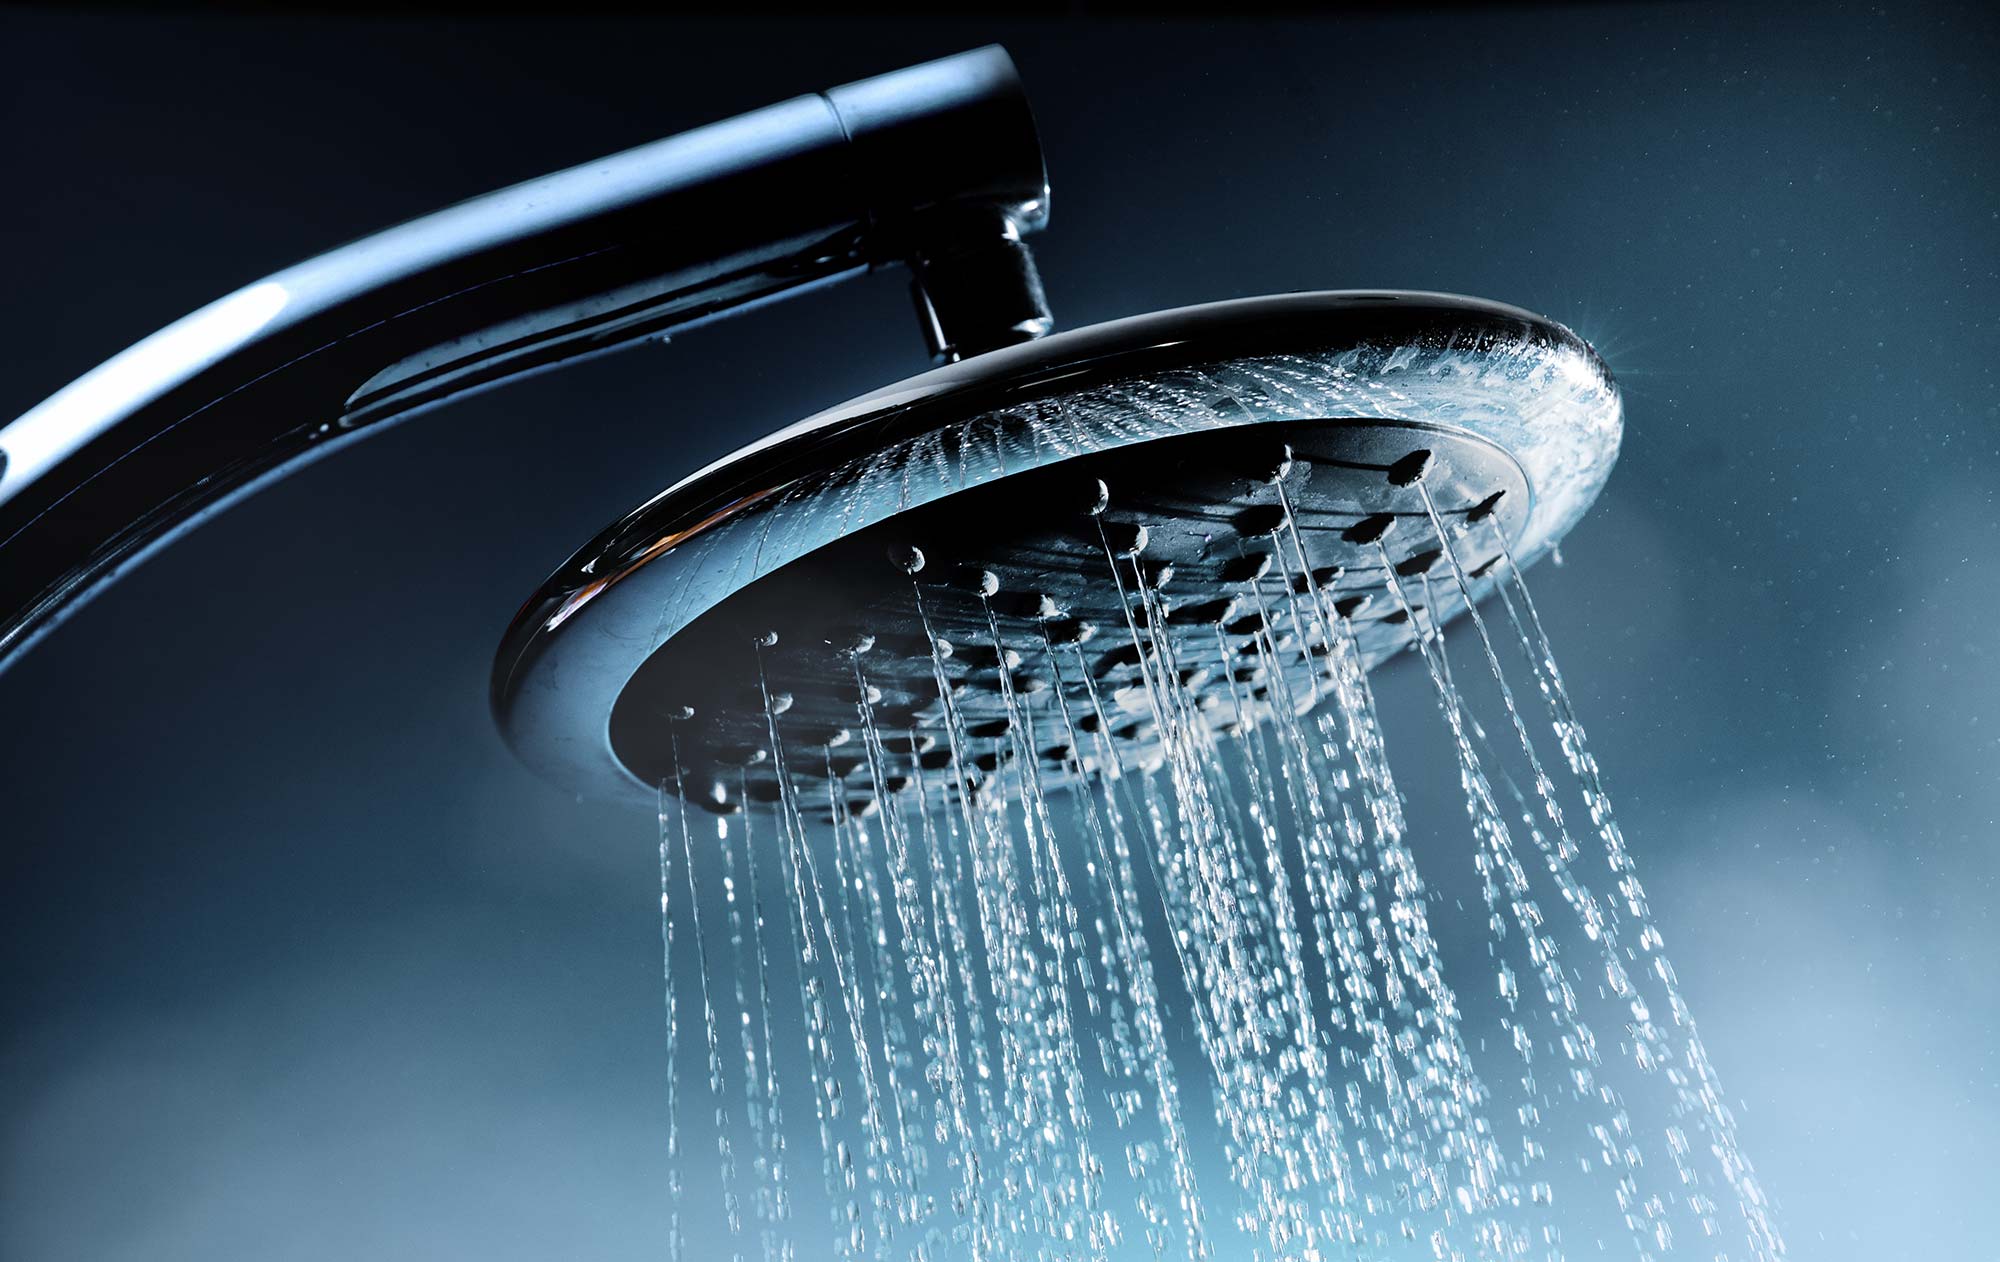 Shower head running with water